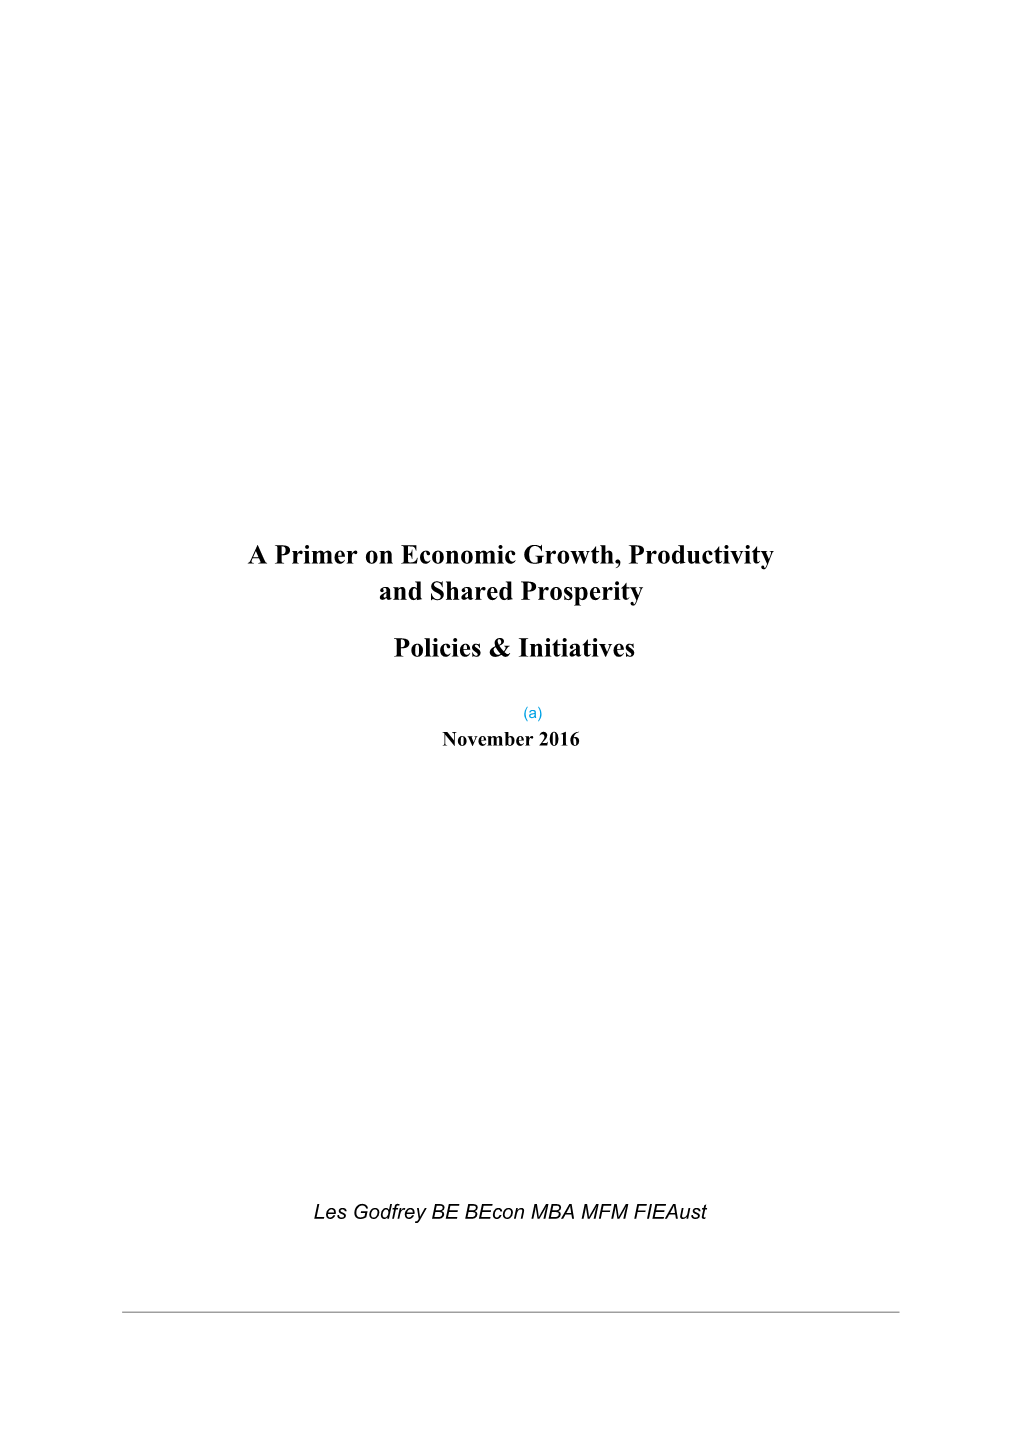 Submission 2 - Attachment: a Primer on Economic Growth, Productivity and Shared Prosperity